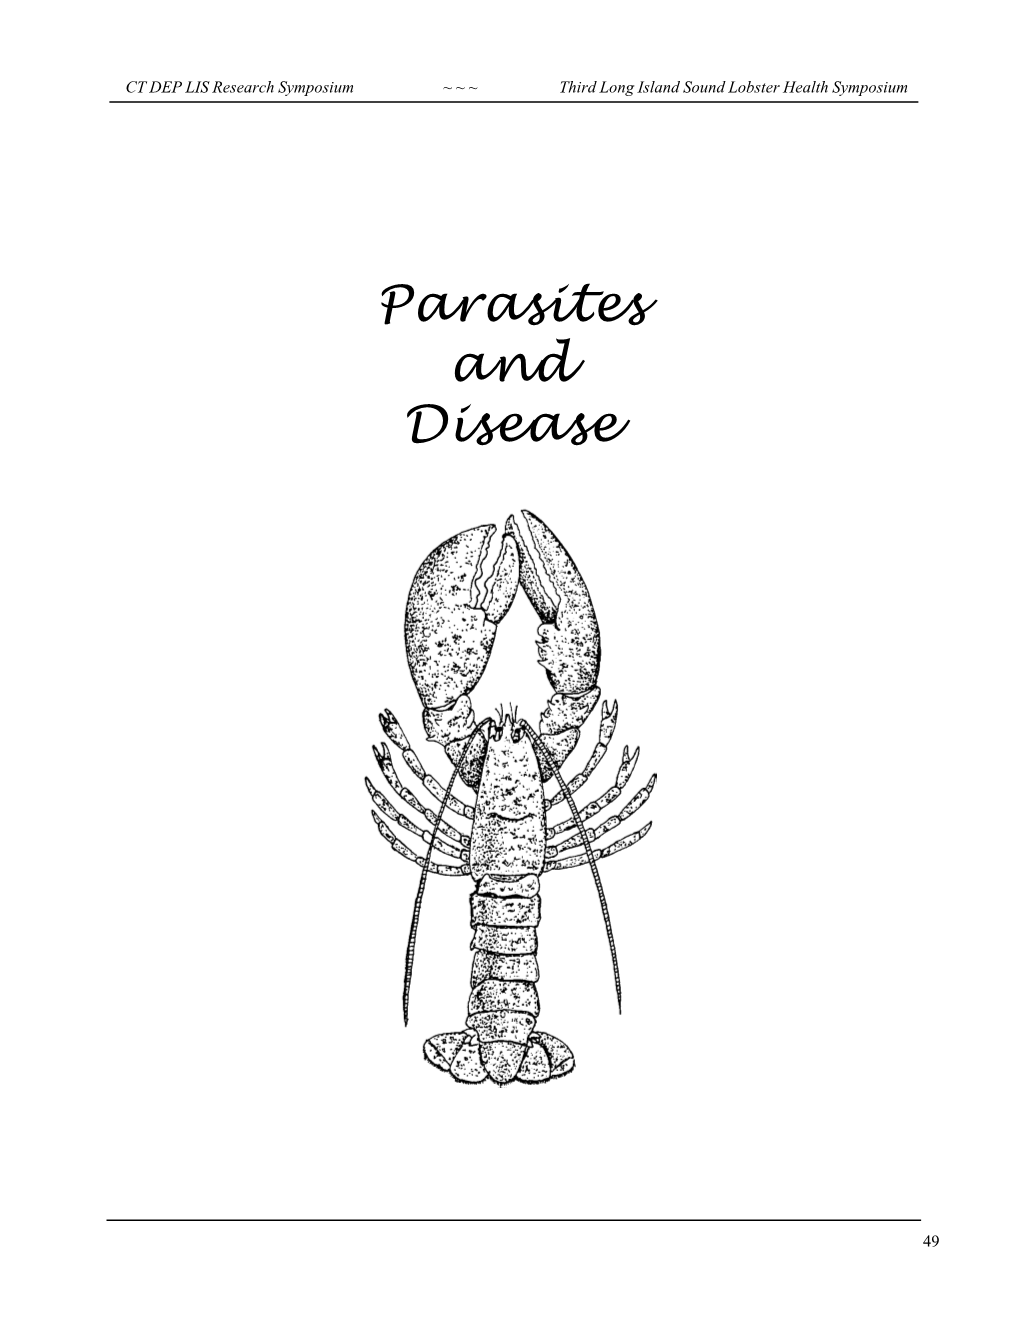 Parasites and Disease